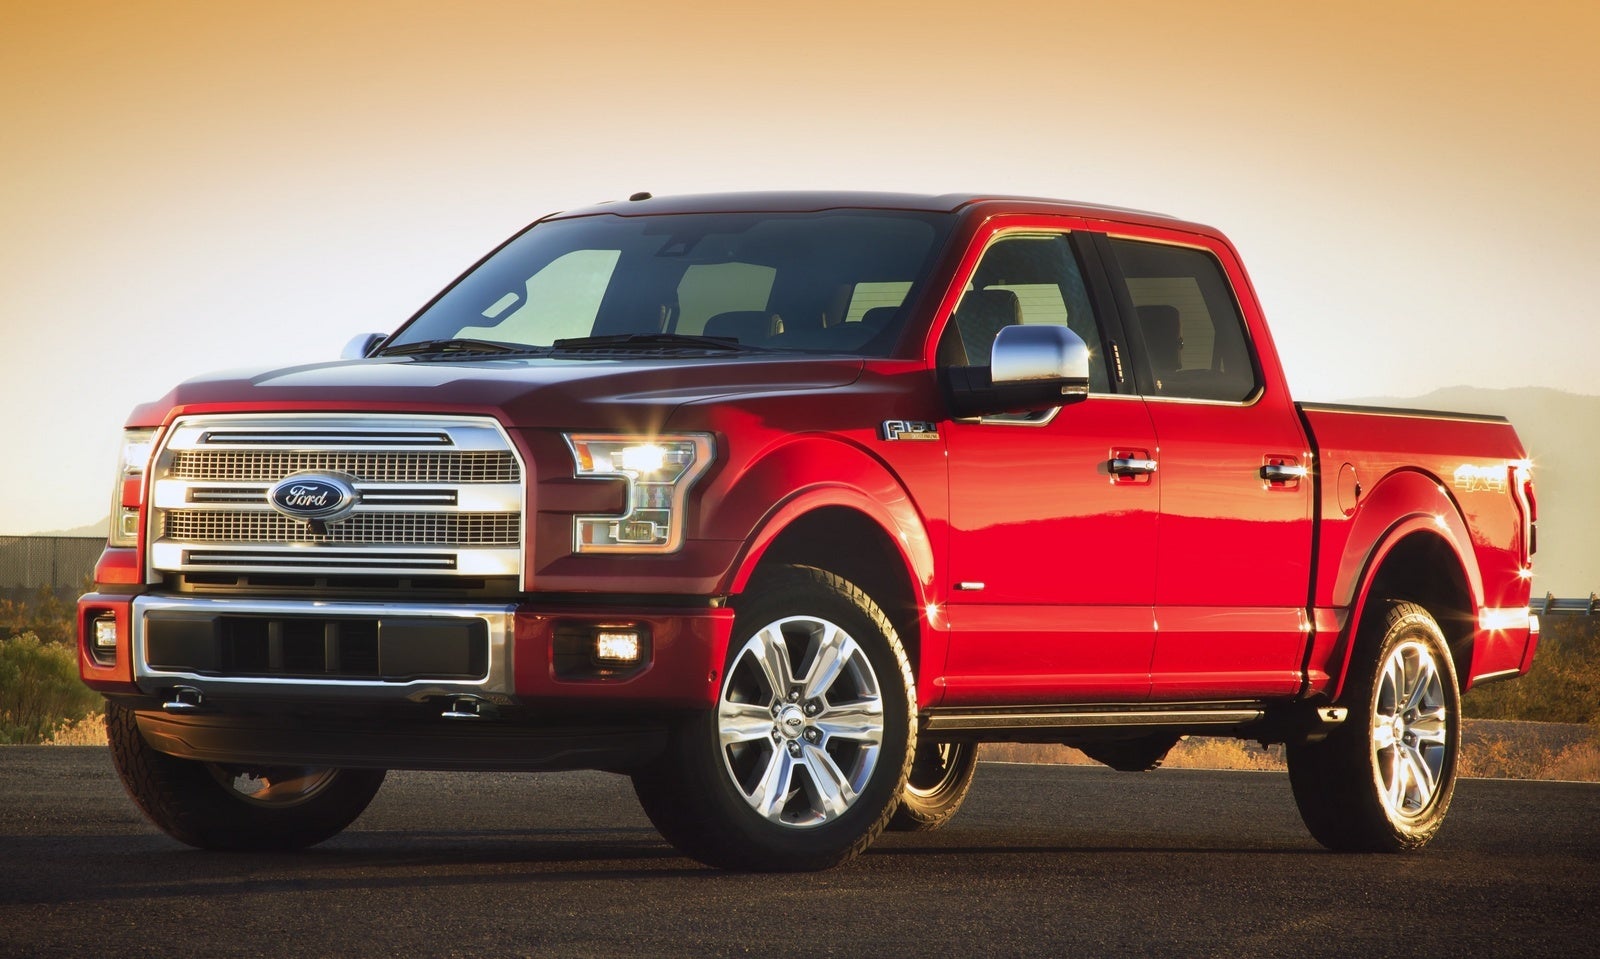 New 2015 / 2016 Ford F-150 For Sale - CarGurus